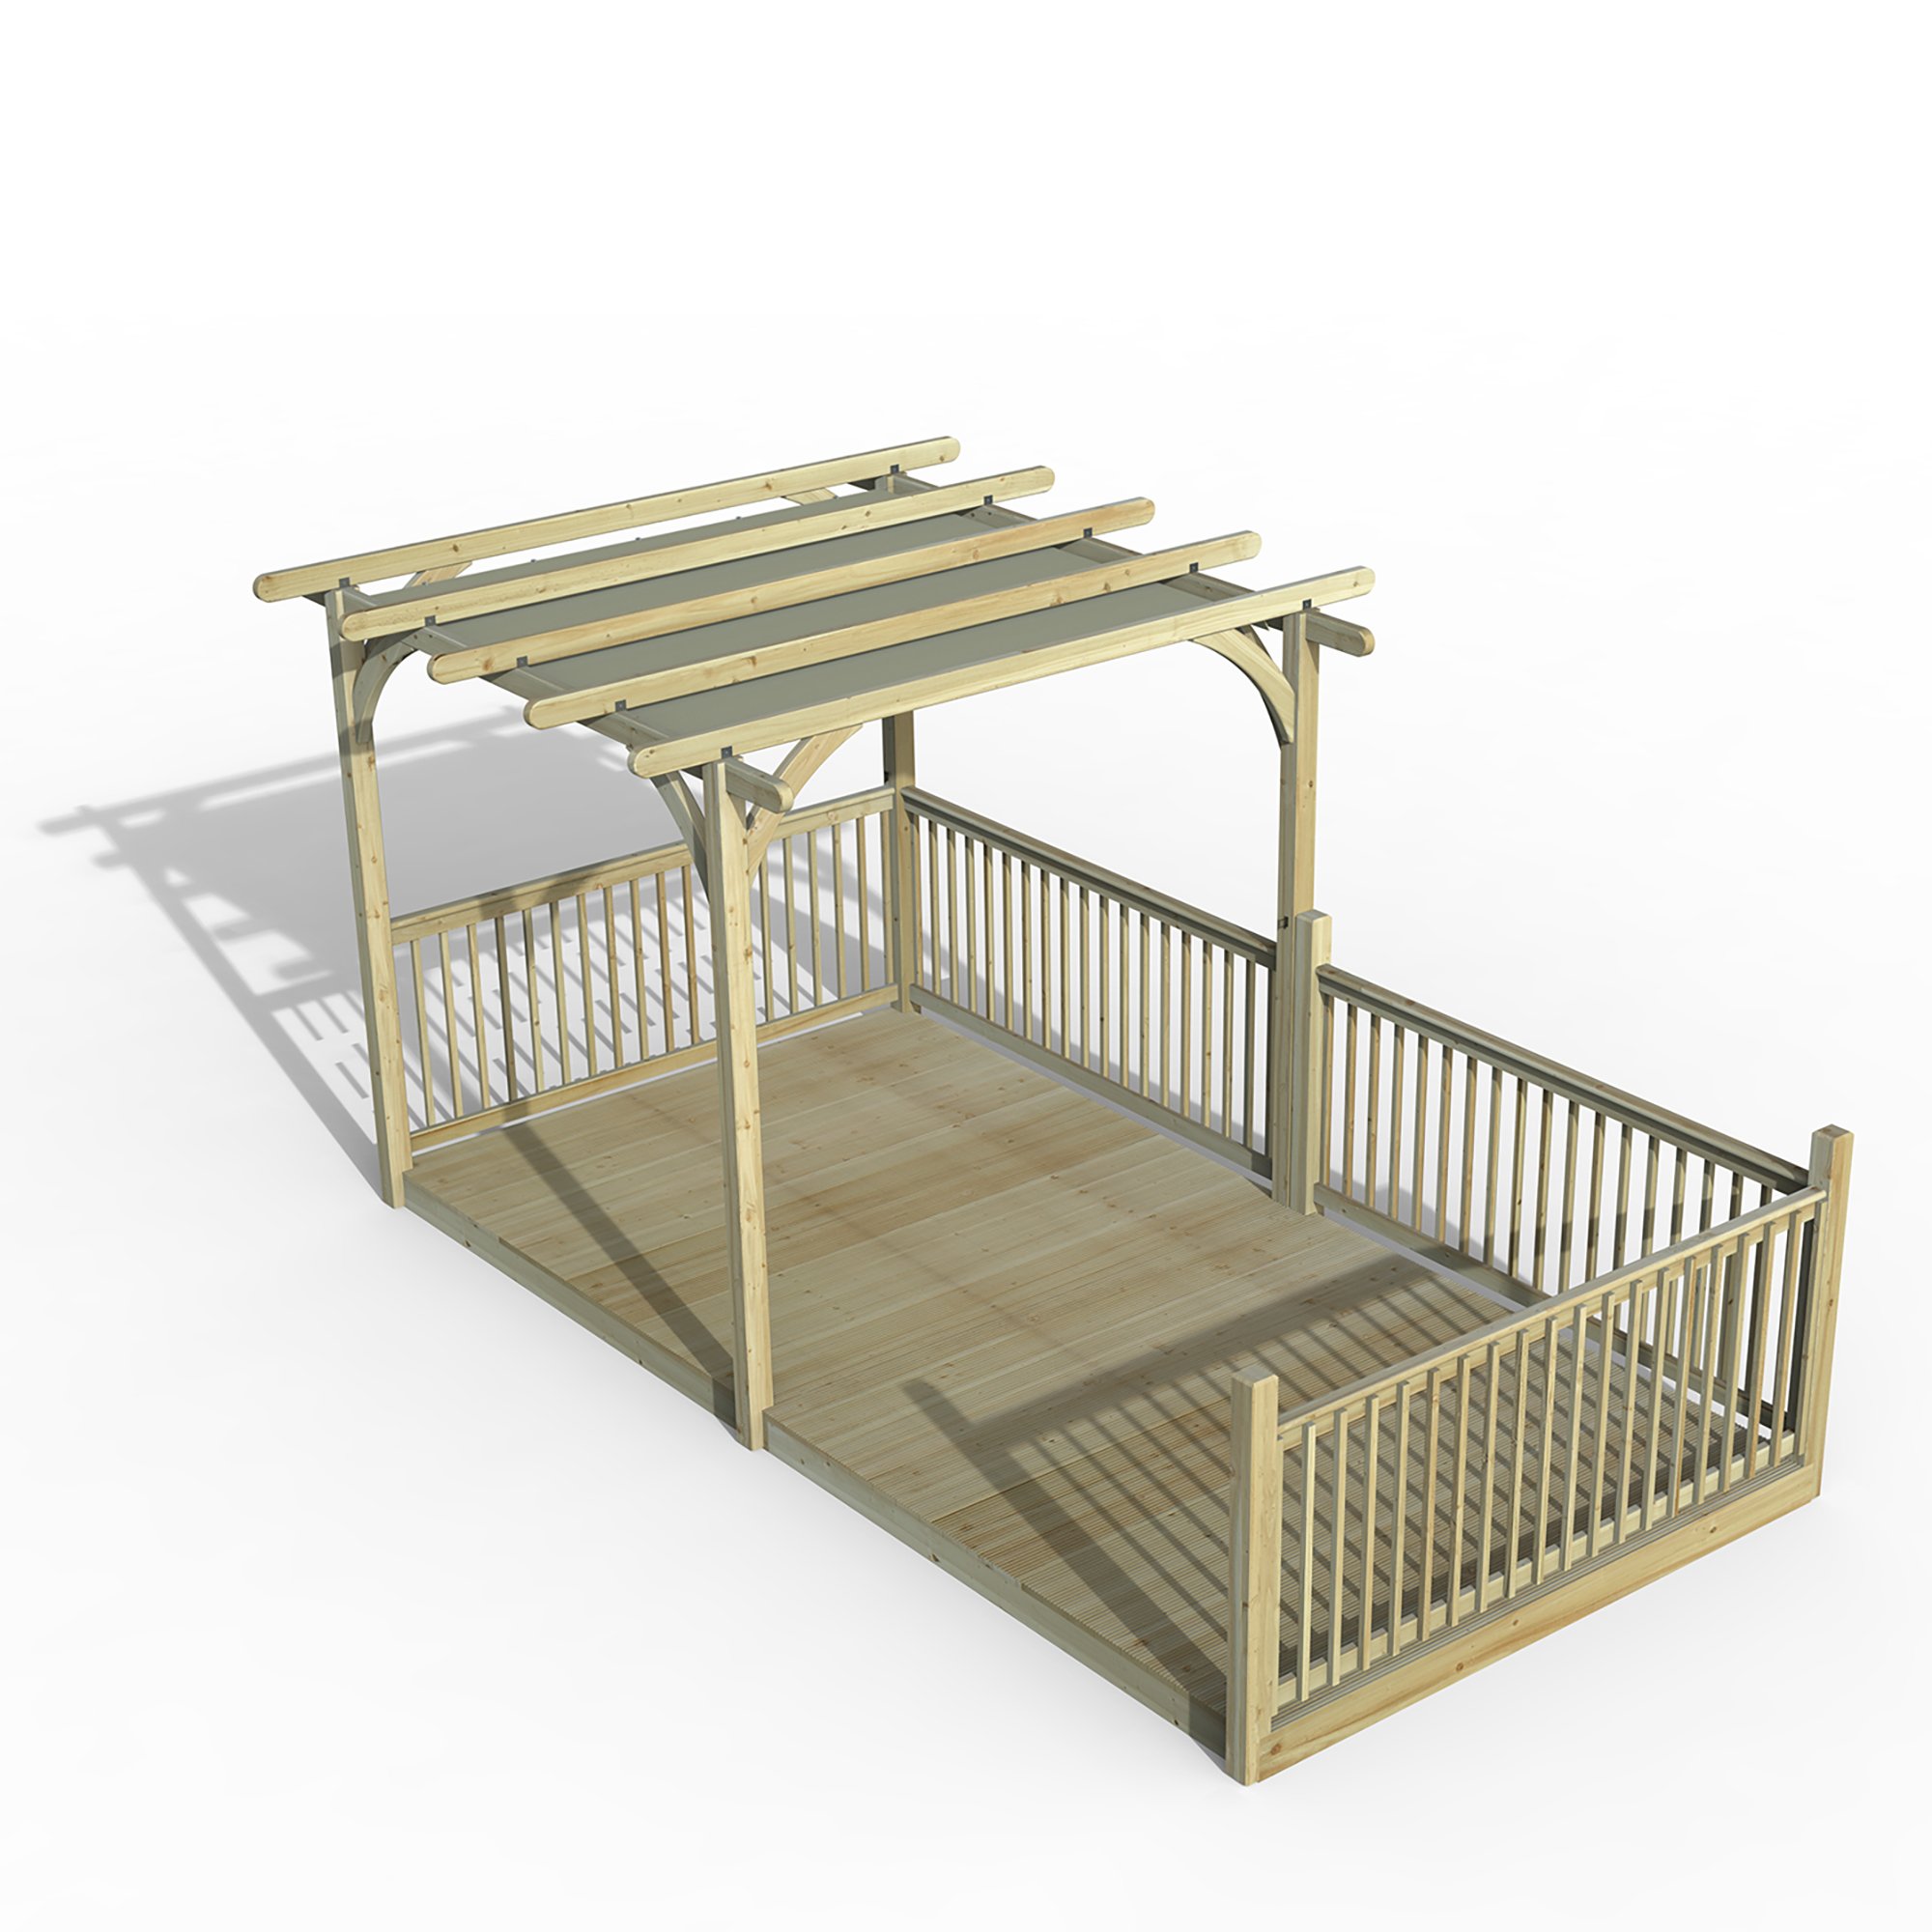 Forest Garden 2.4 x 4.8m Ultima Pergola and Decking Kit with Canopy (Floor Included)